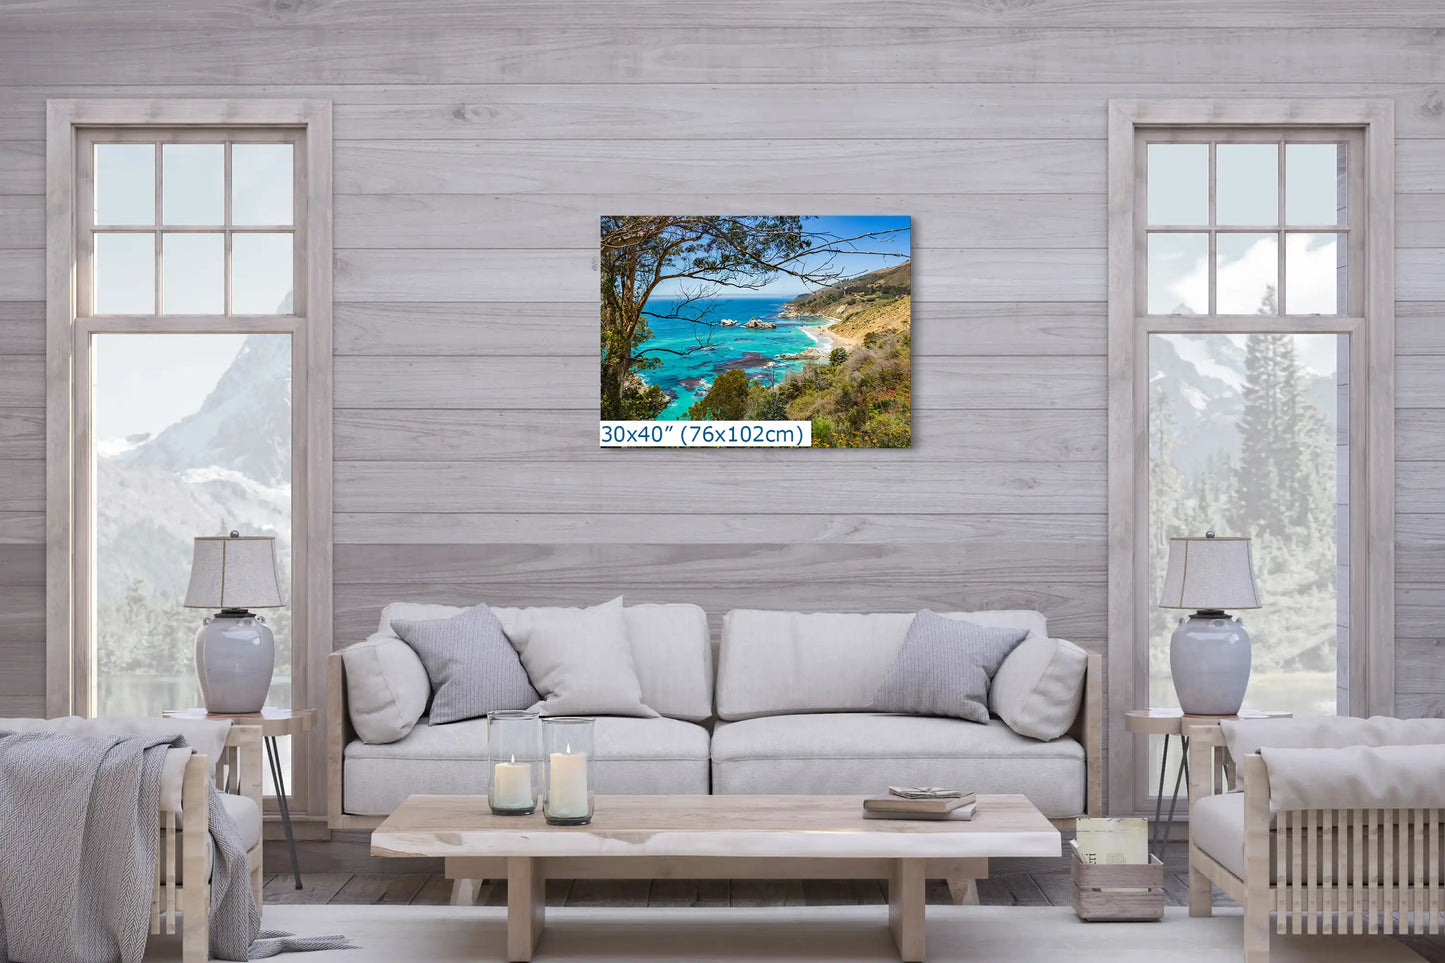 Big Sur California ocean seascape wall art shown in 30x40-inch over living room couch